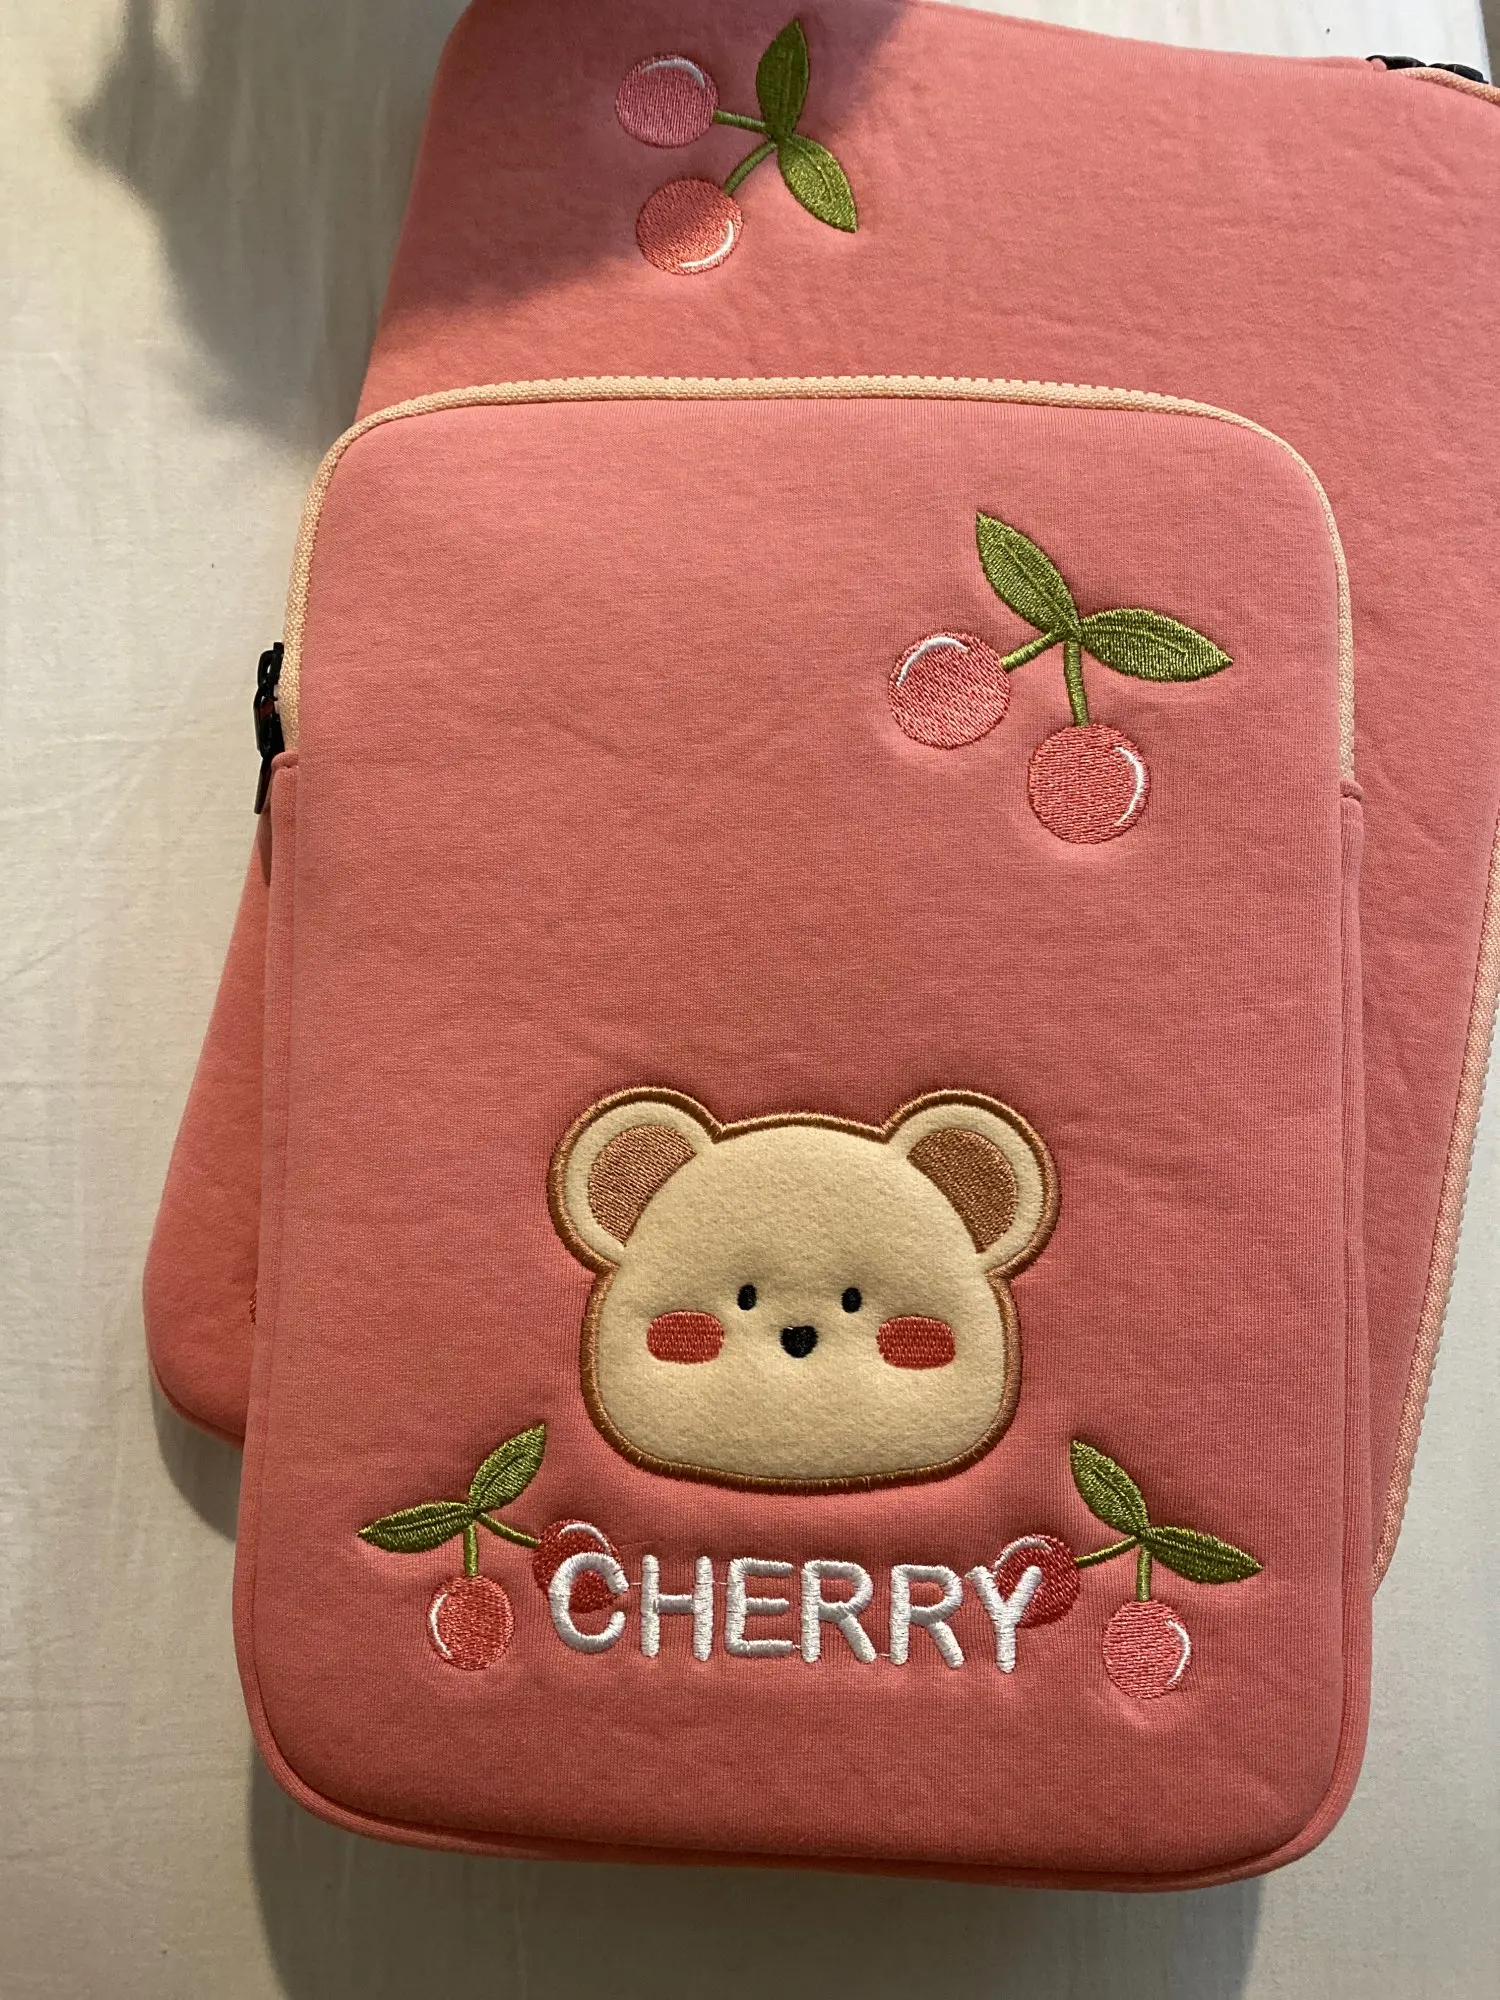 13.3 inch  • Handmade •  perfect gift tablets and iPad Air and pro•  11 Cute Soft pink Cherry Sleeve cherry bear Bag for Laptops